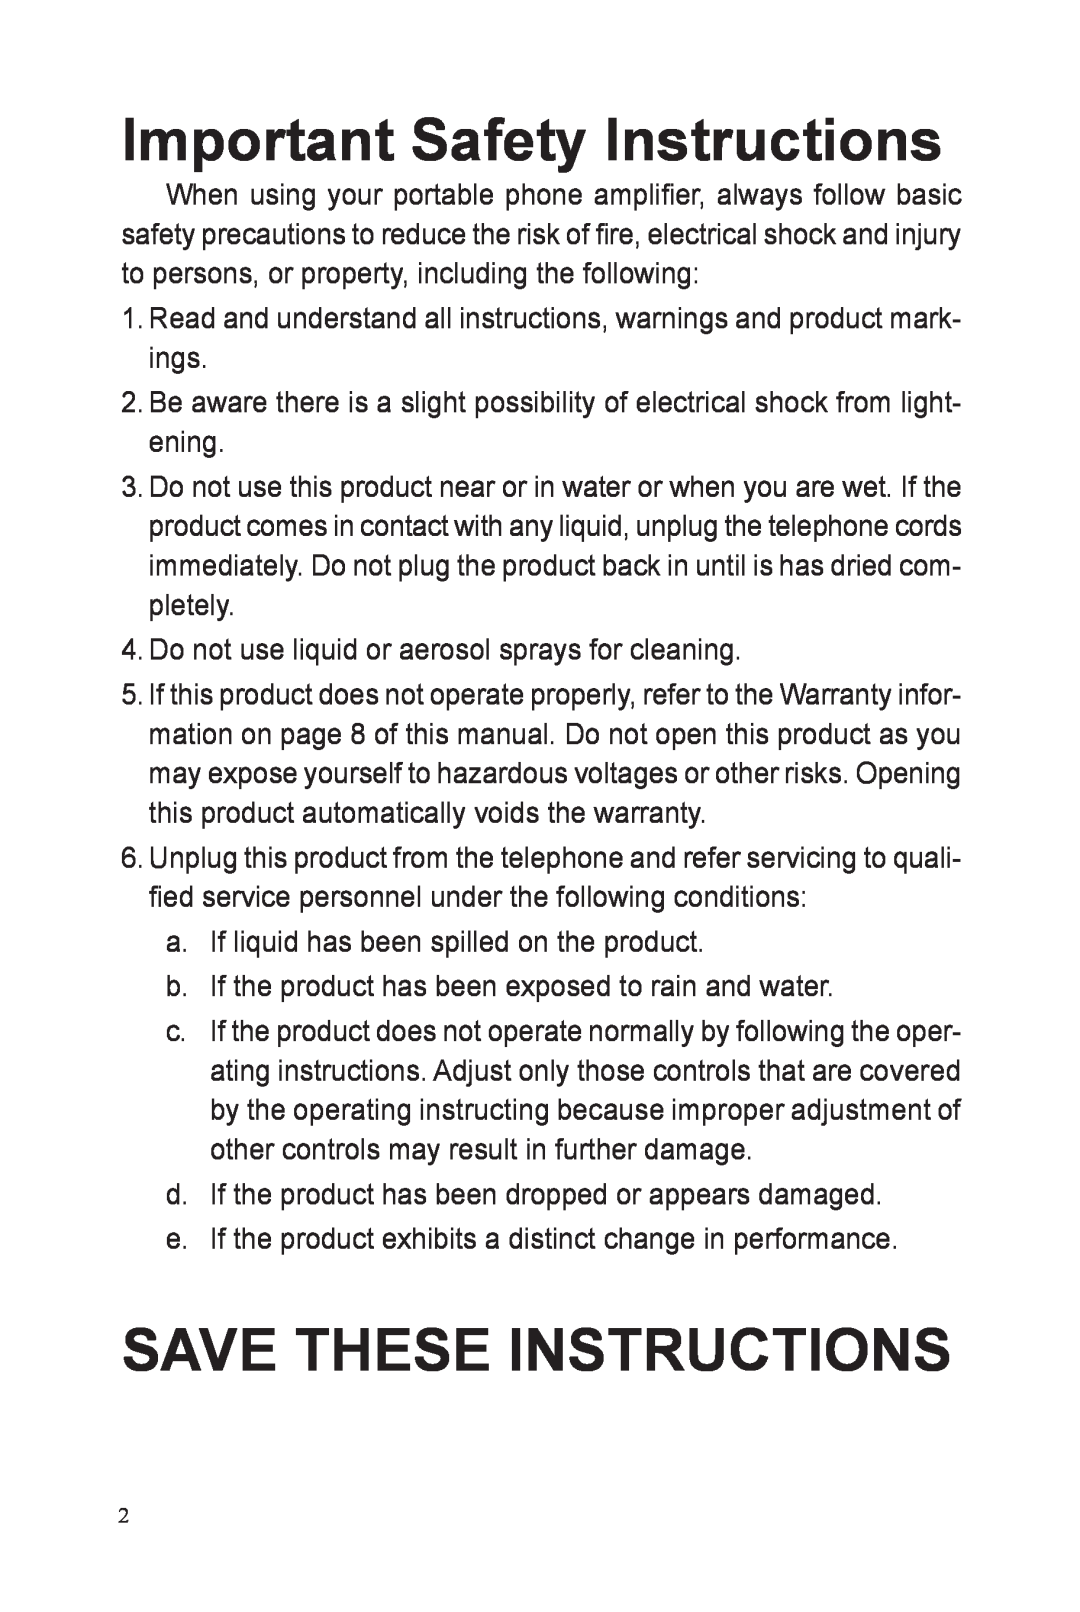 ClearSounds IL40 manual Important Safety Instructions, Save These Instructions 